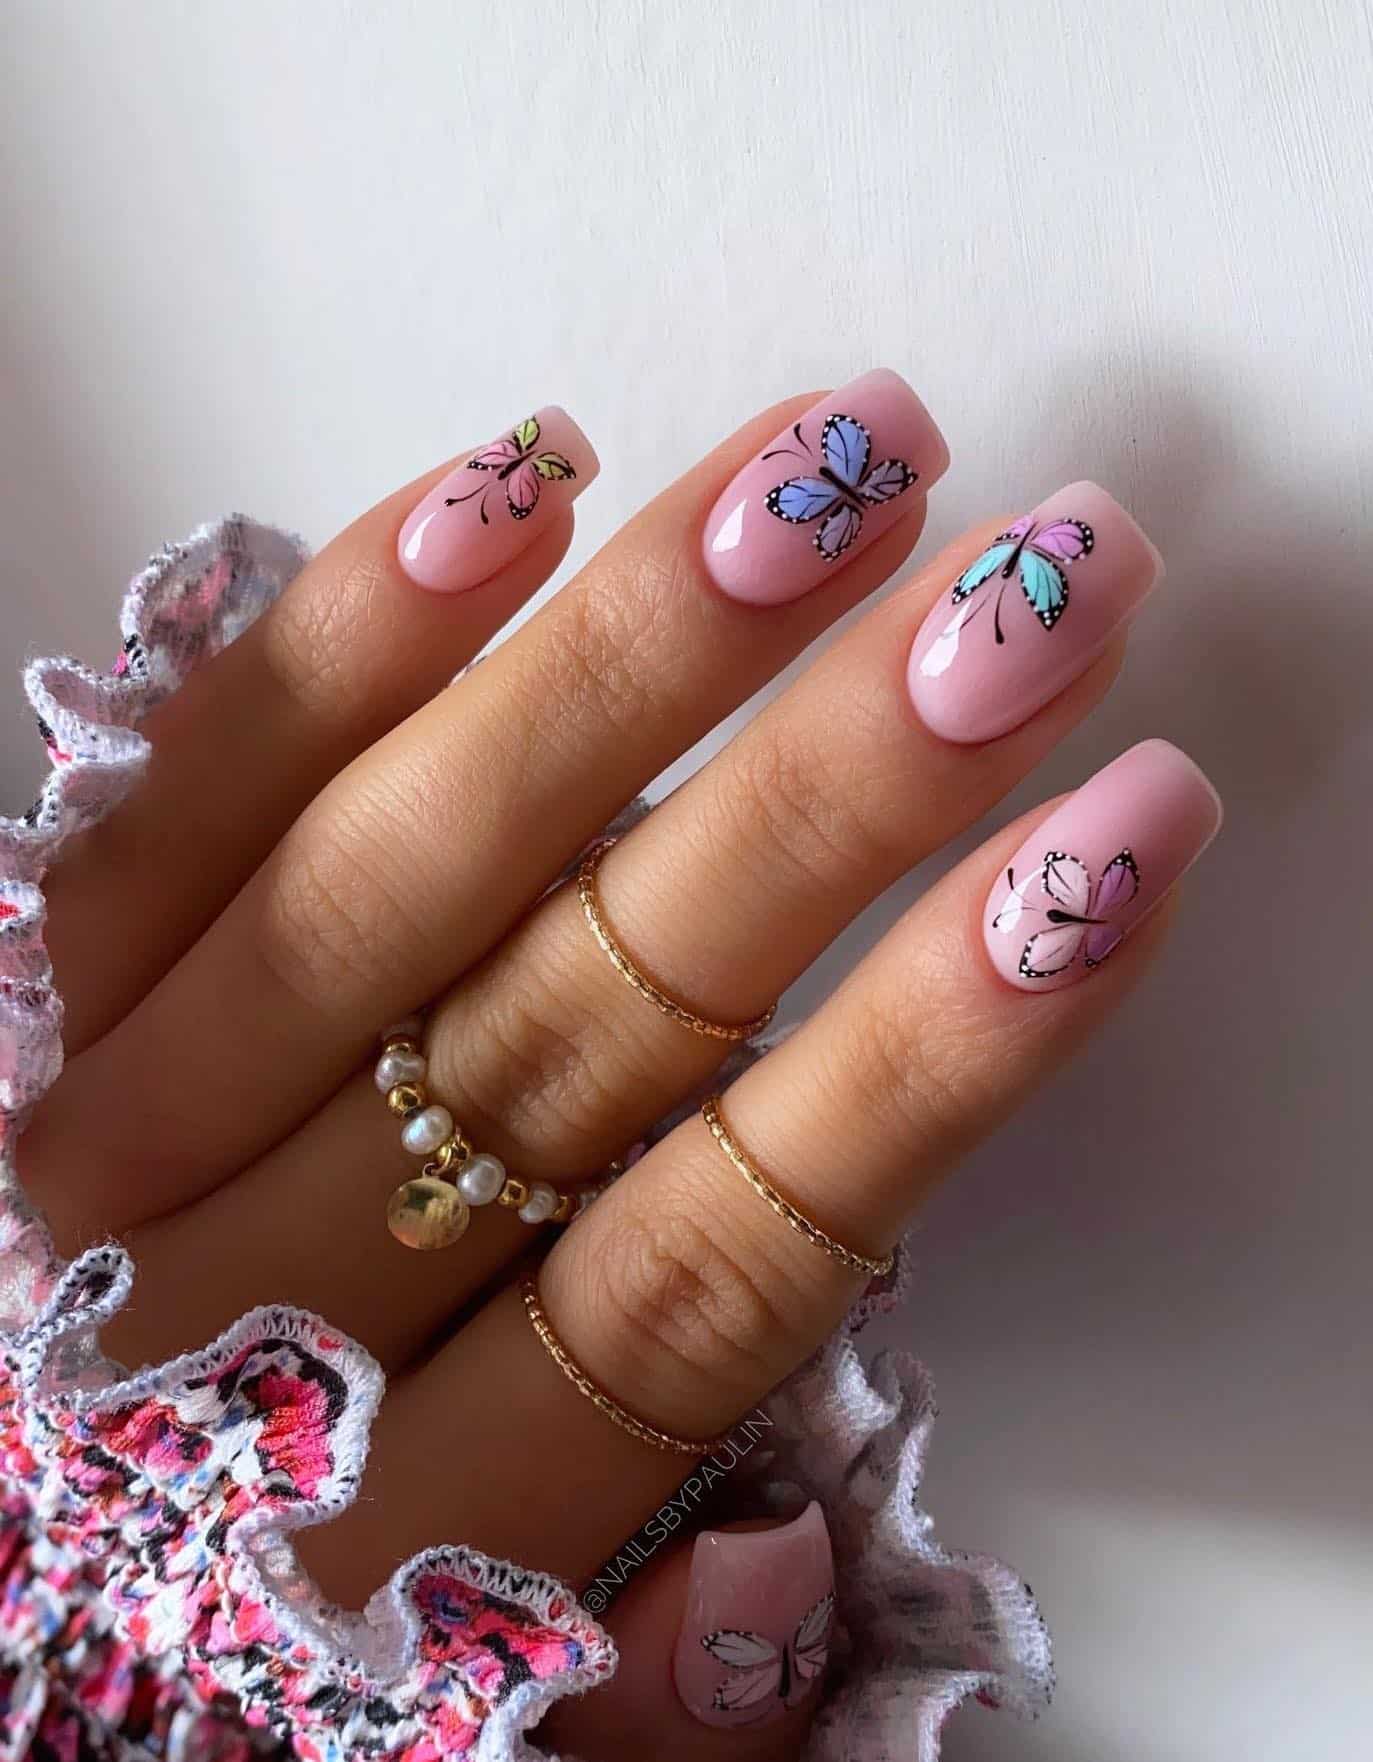 A hand with short square nails painted a light pink with colorful butterflies